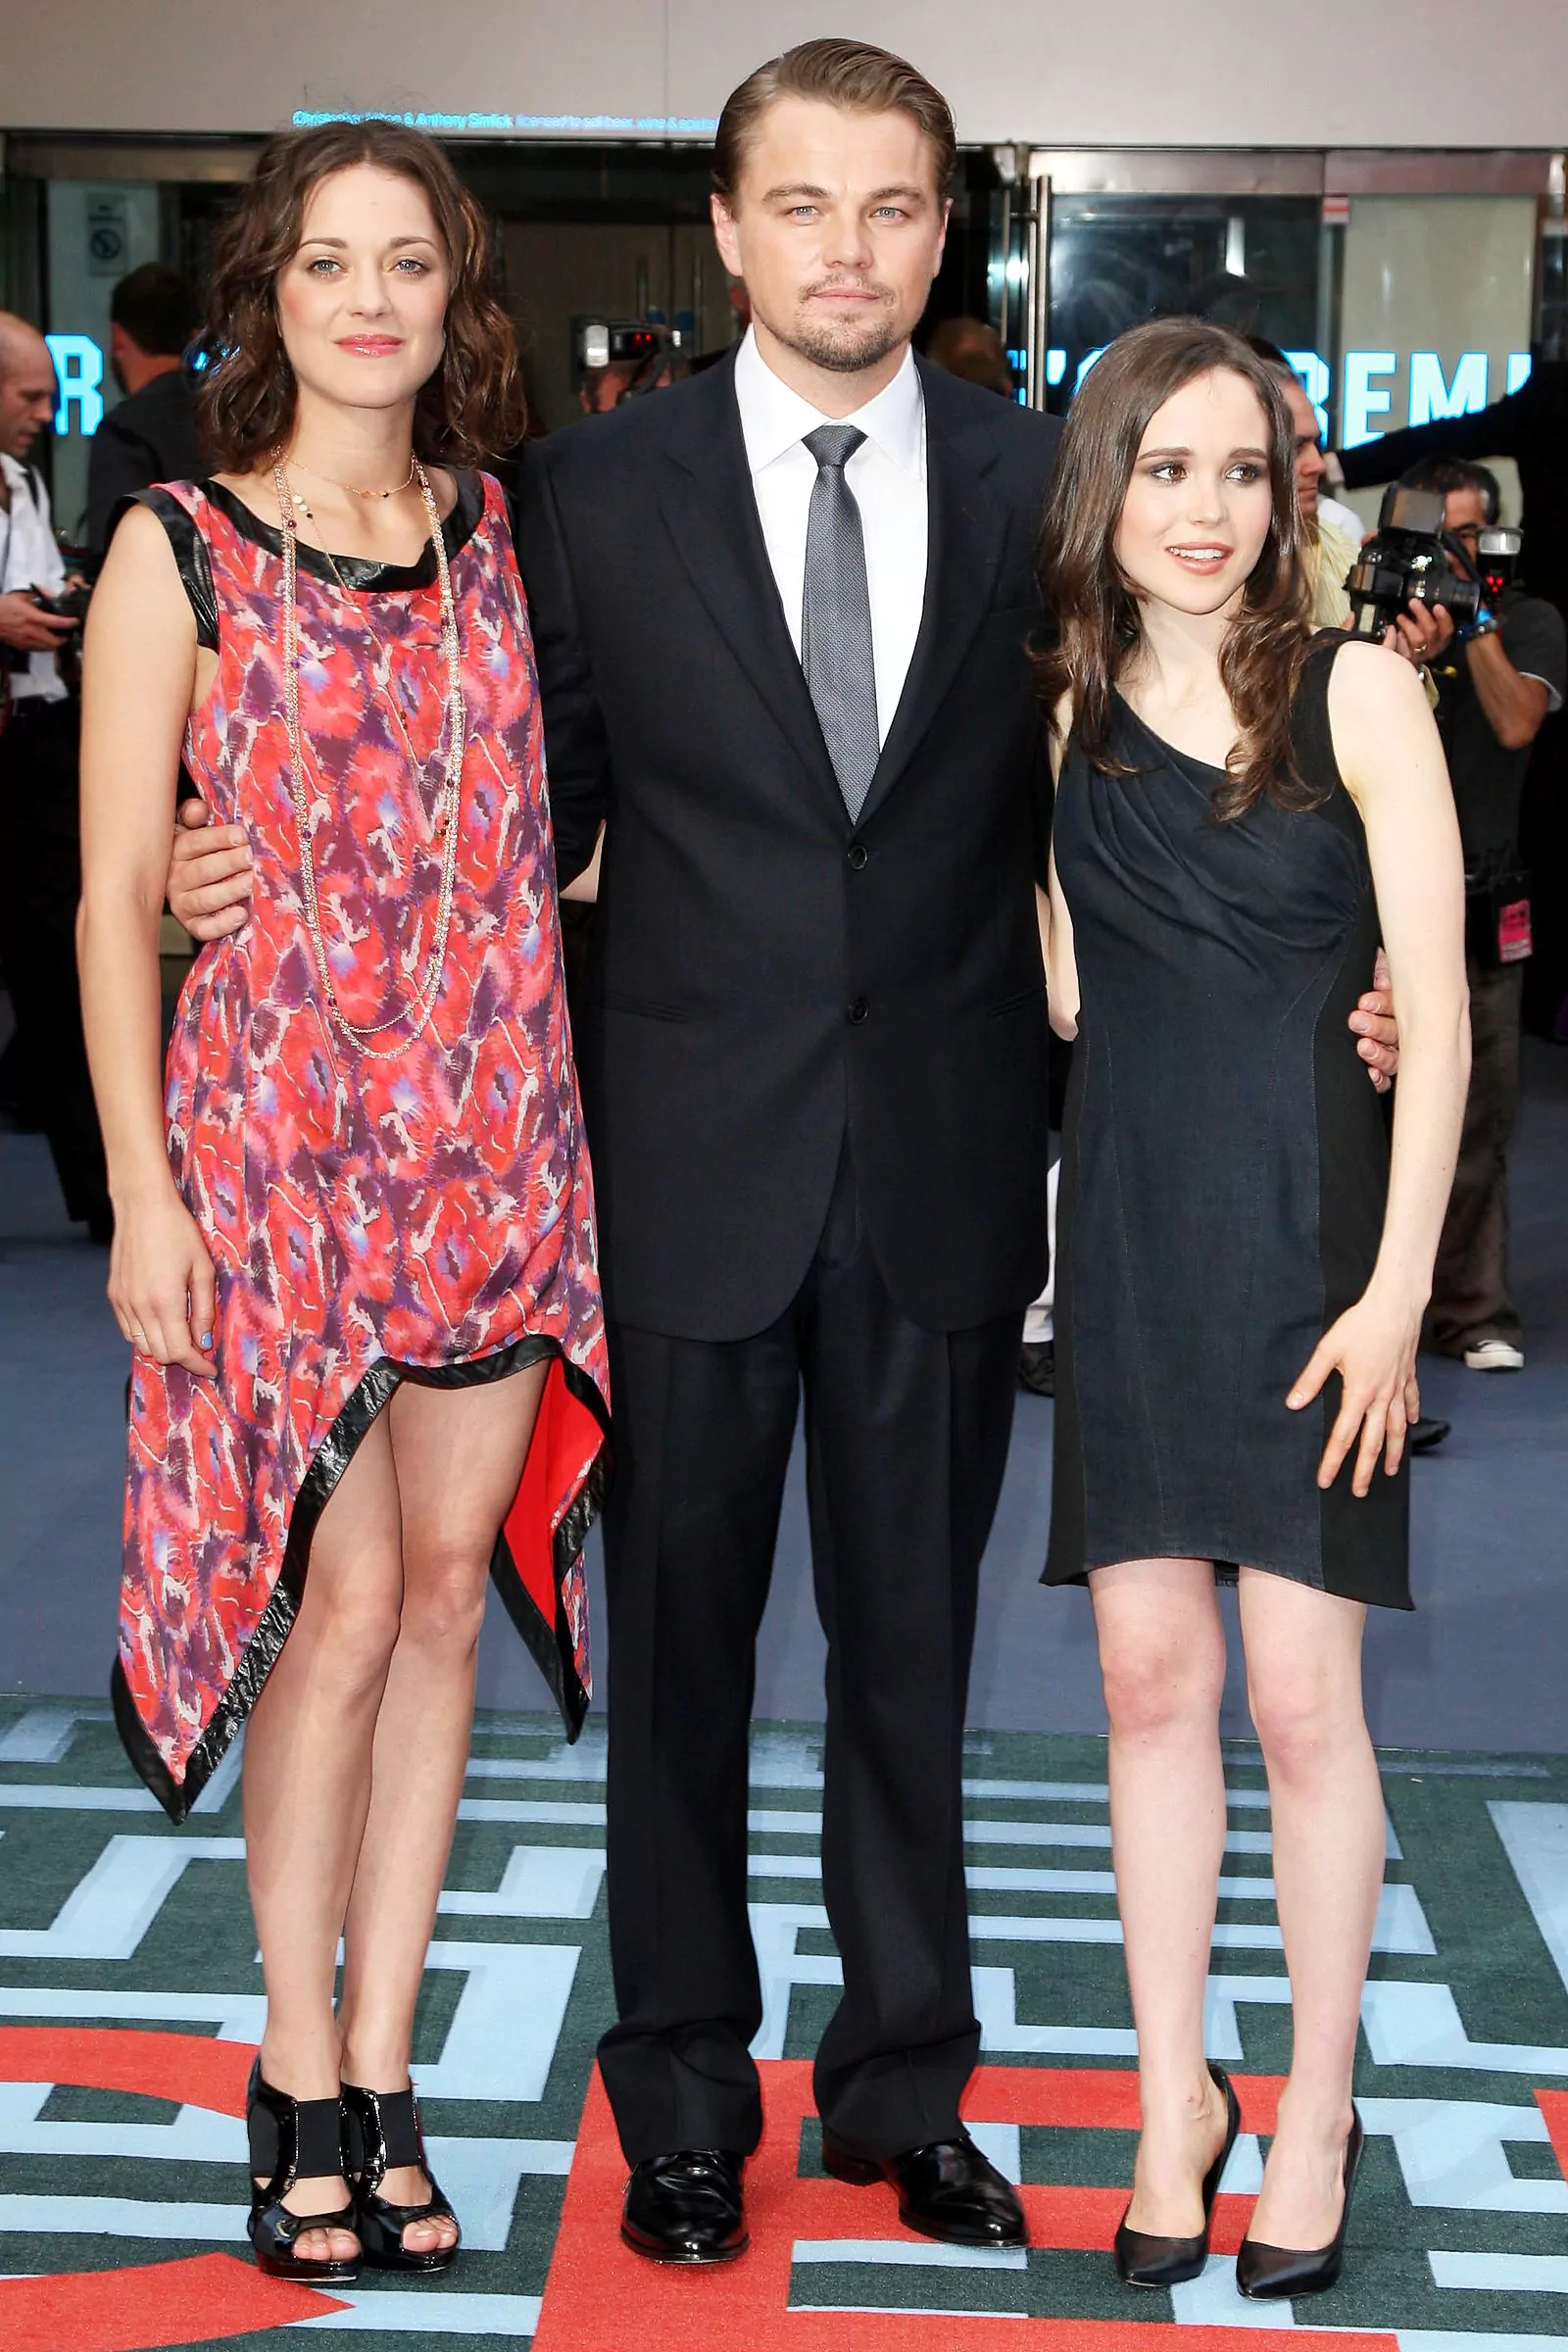 Marion Cotillard, Leonardo DiCaprio and Ellen Page at the premiere of Inception in London, July 8, 2010.